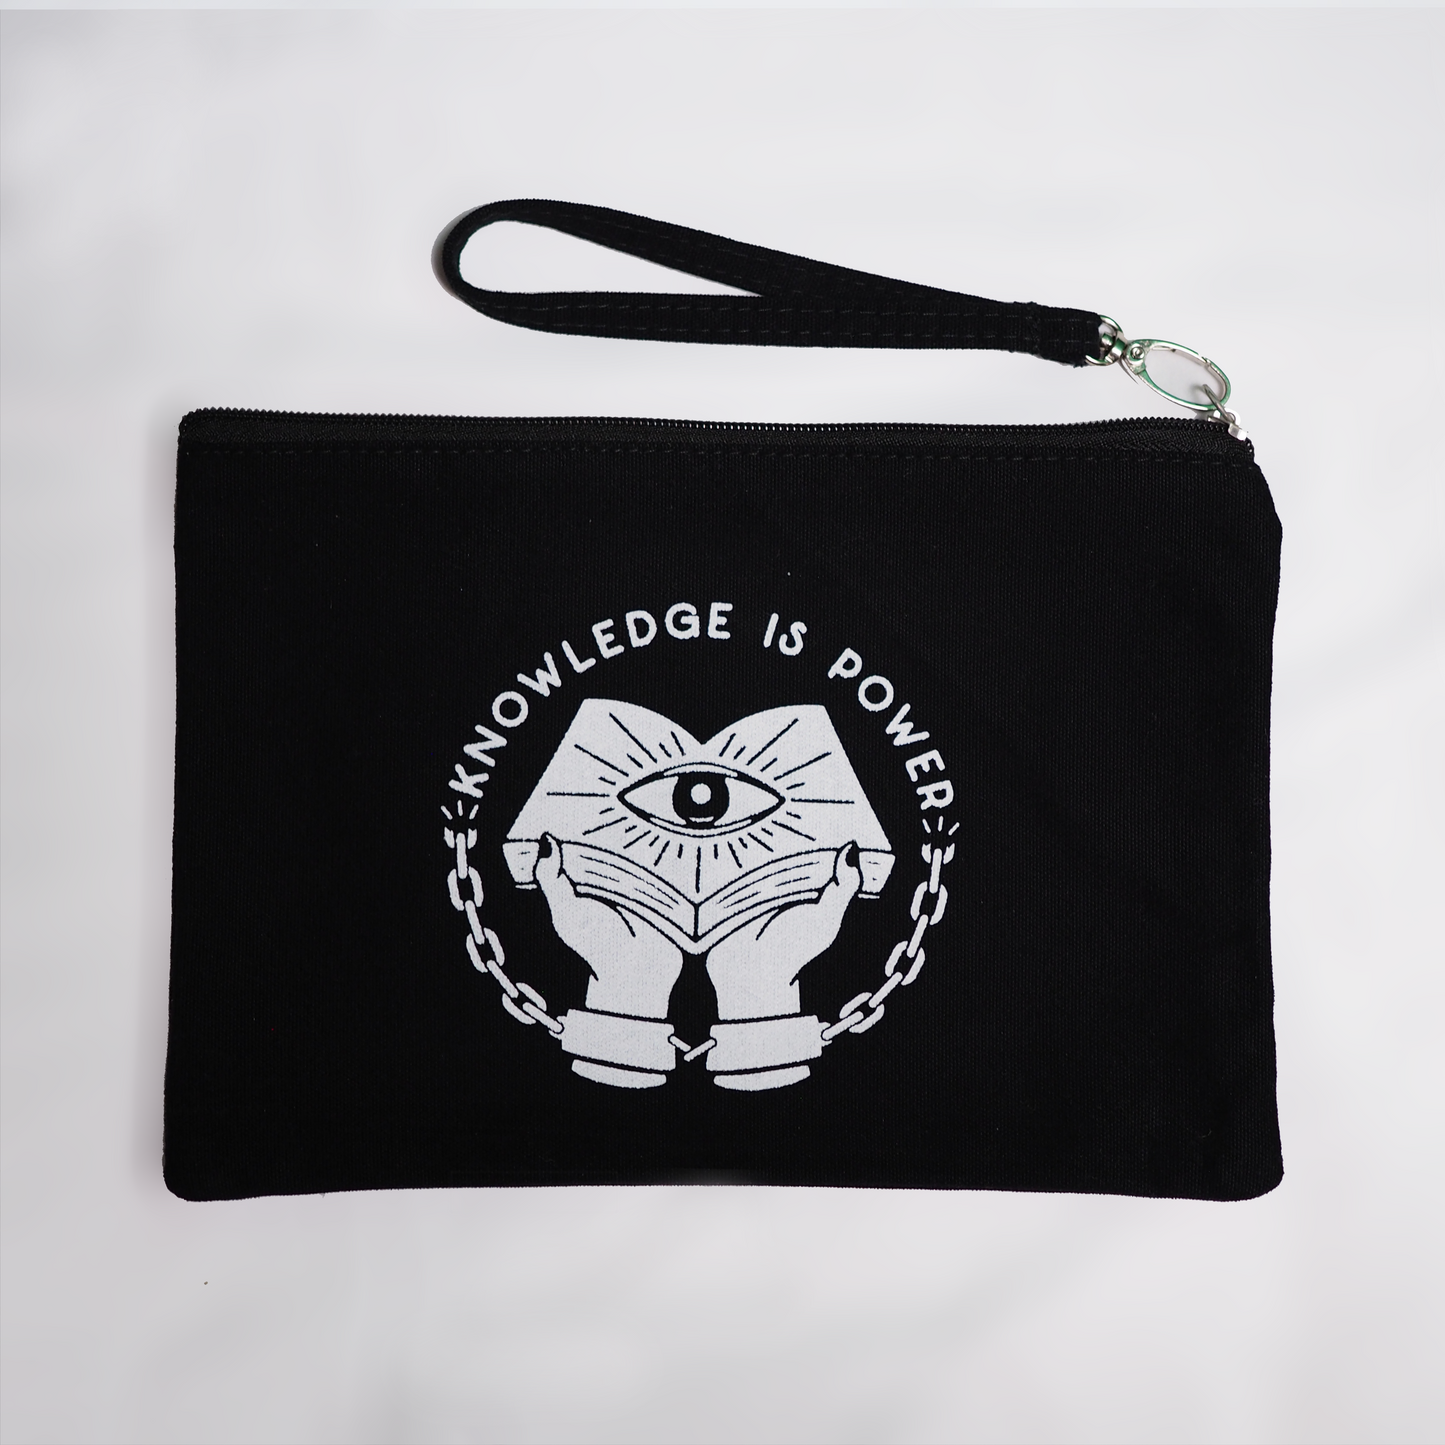 Knowledge is Power - Canvas Zippered Pouch